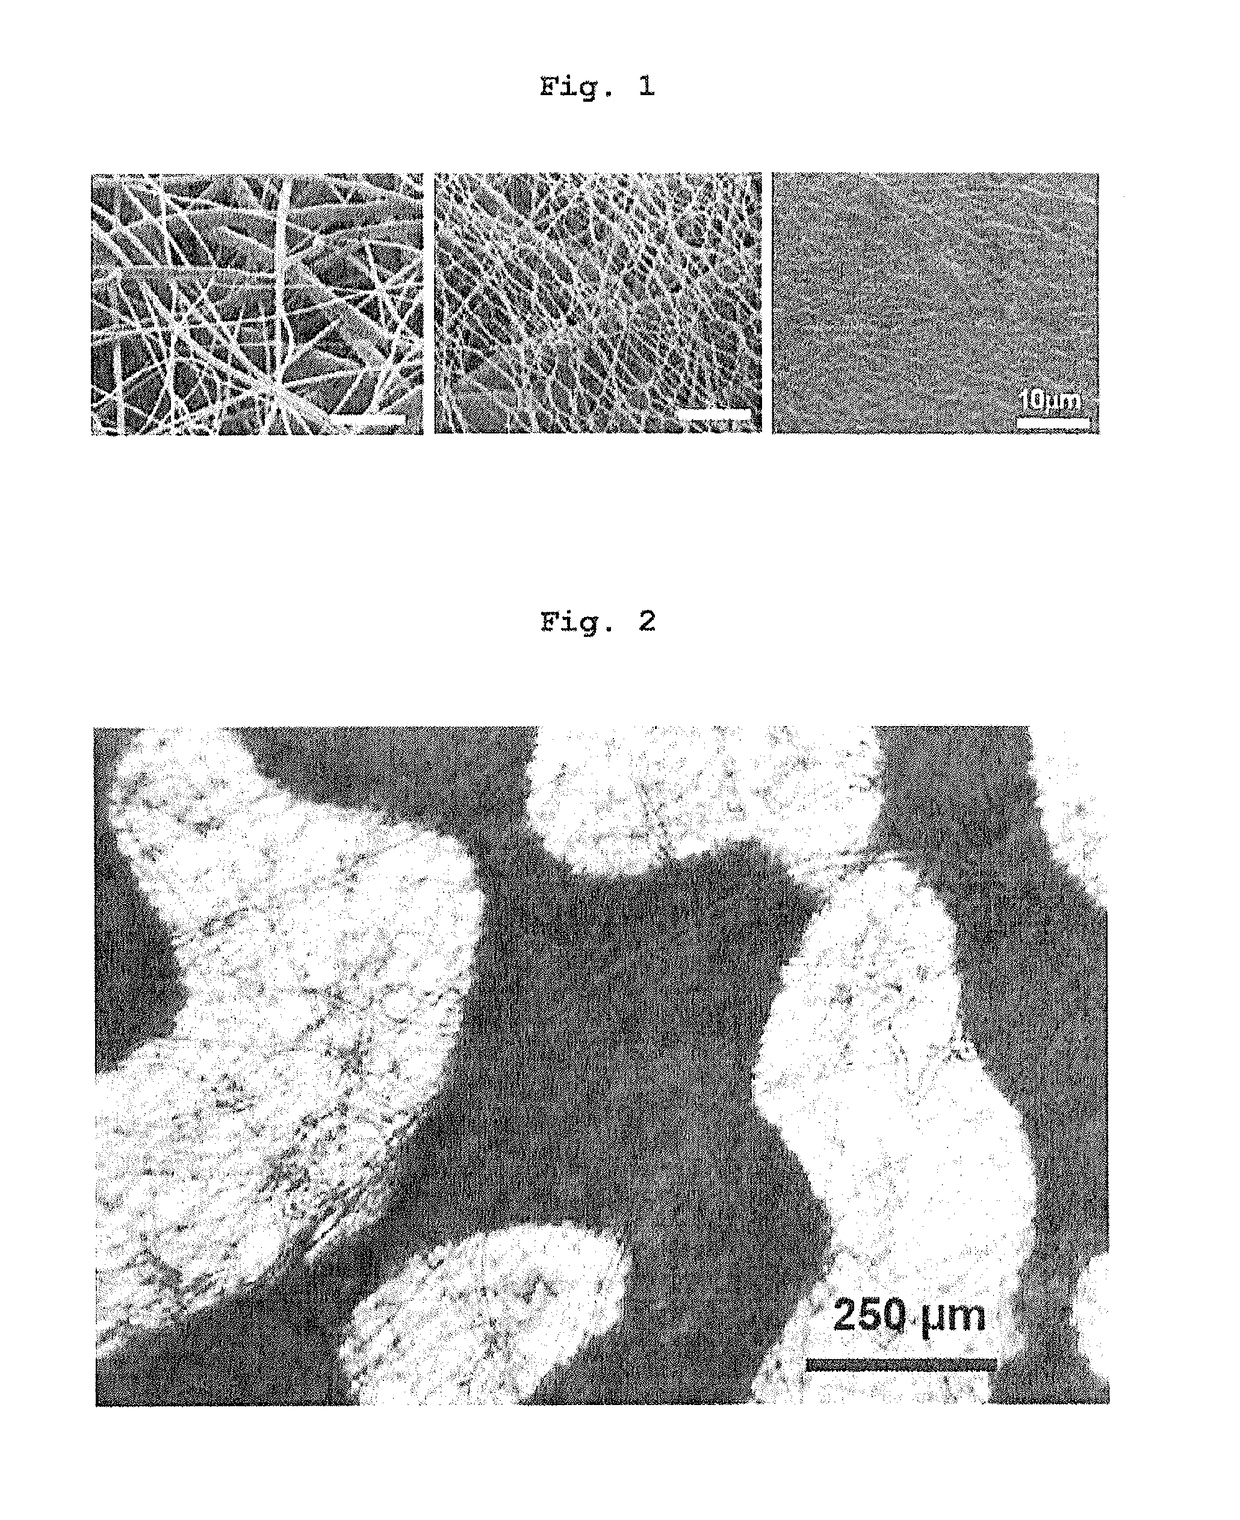 Three-dimensional culture method using biodegradable polymer and culture substrate enabling cell transplantation